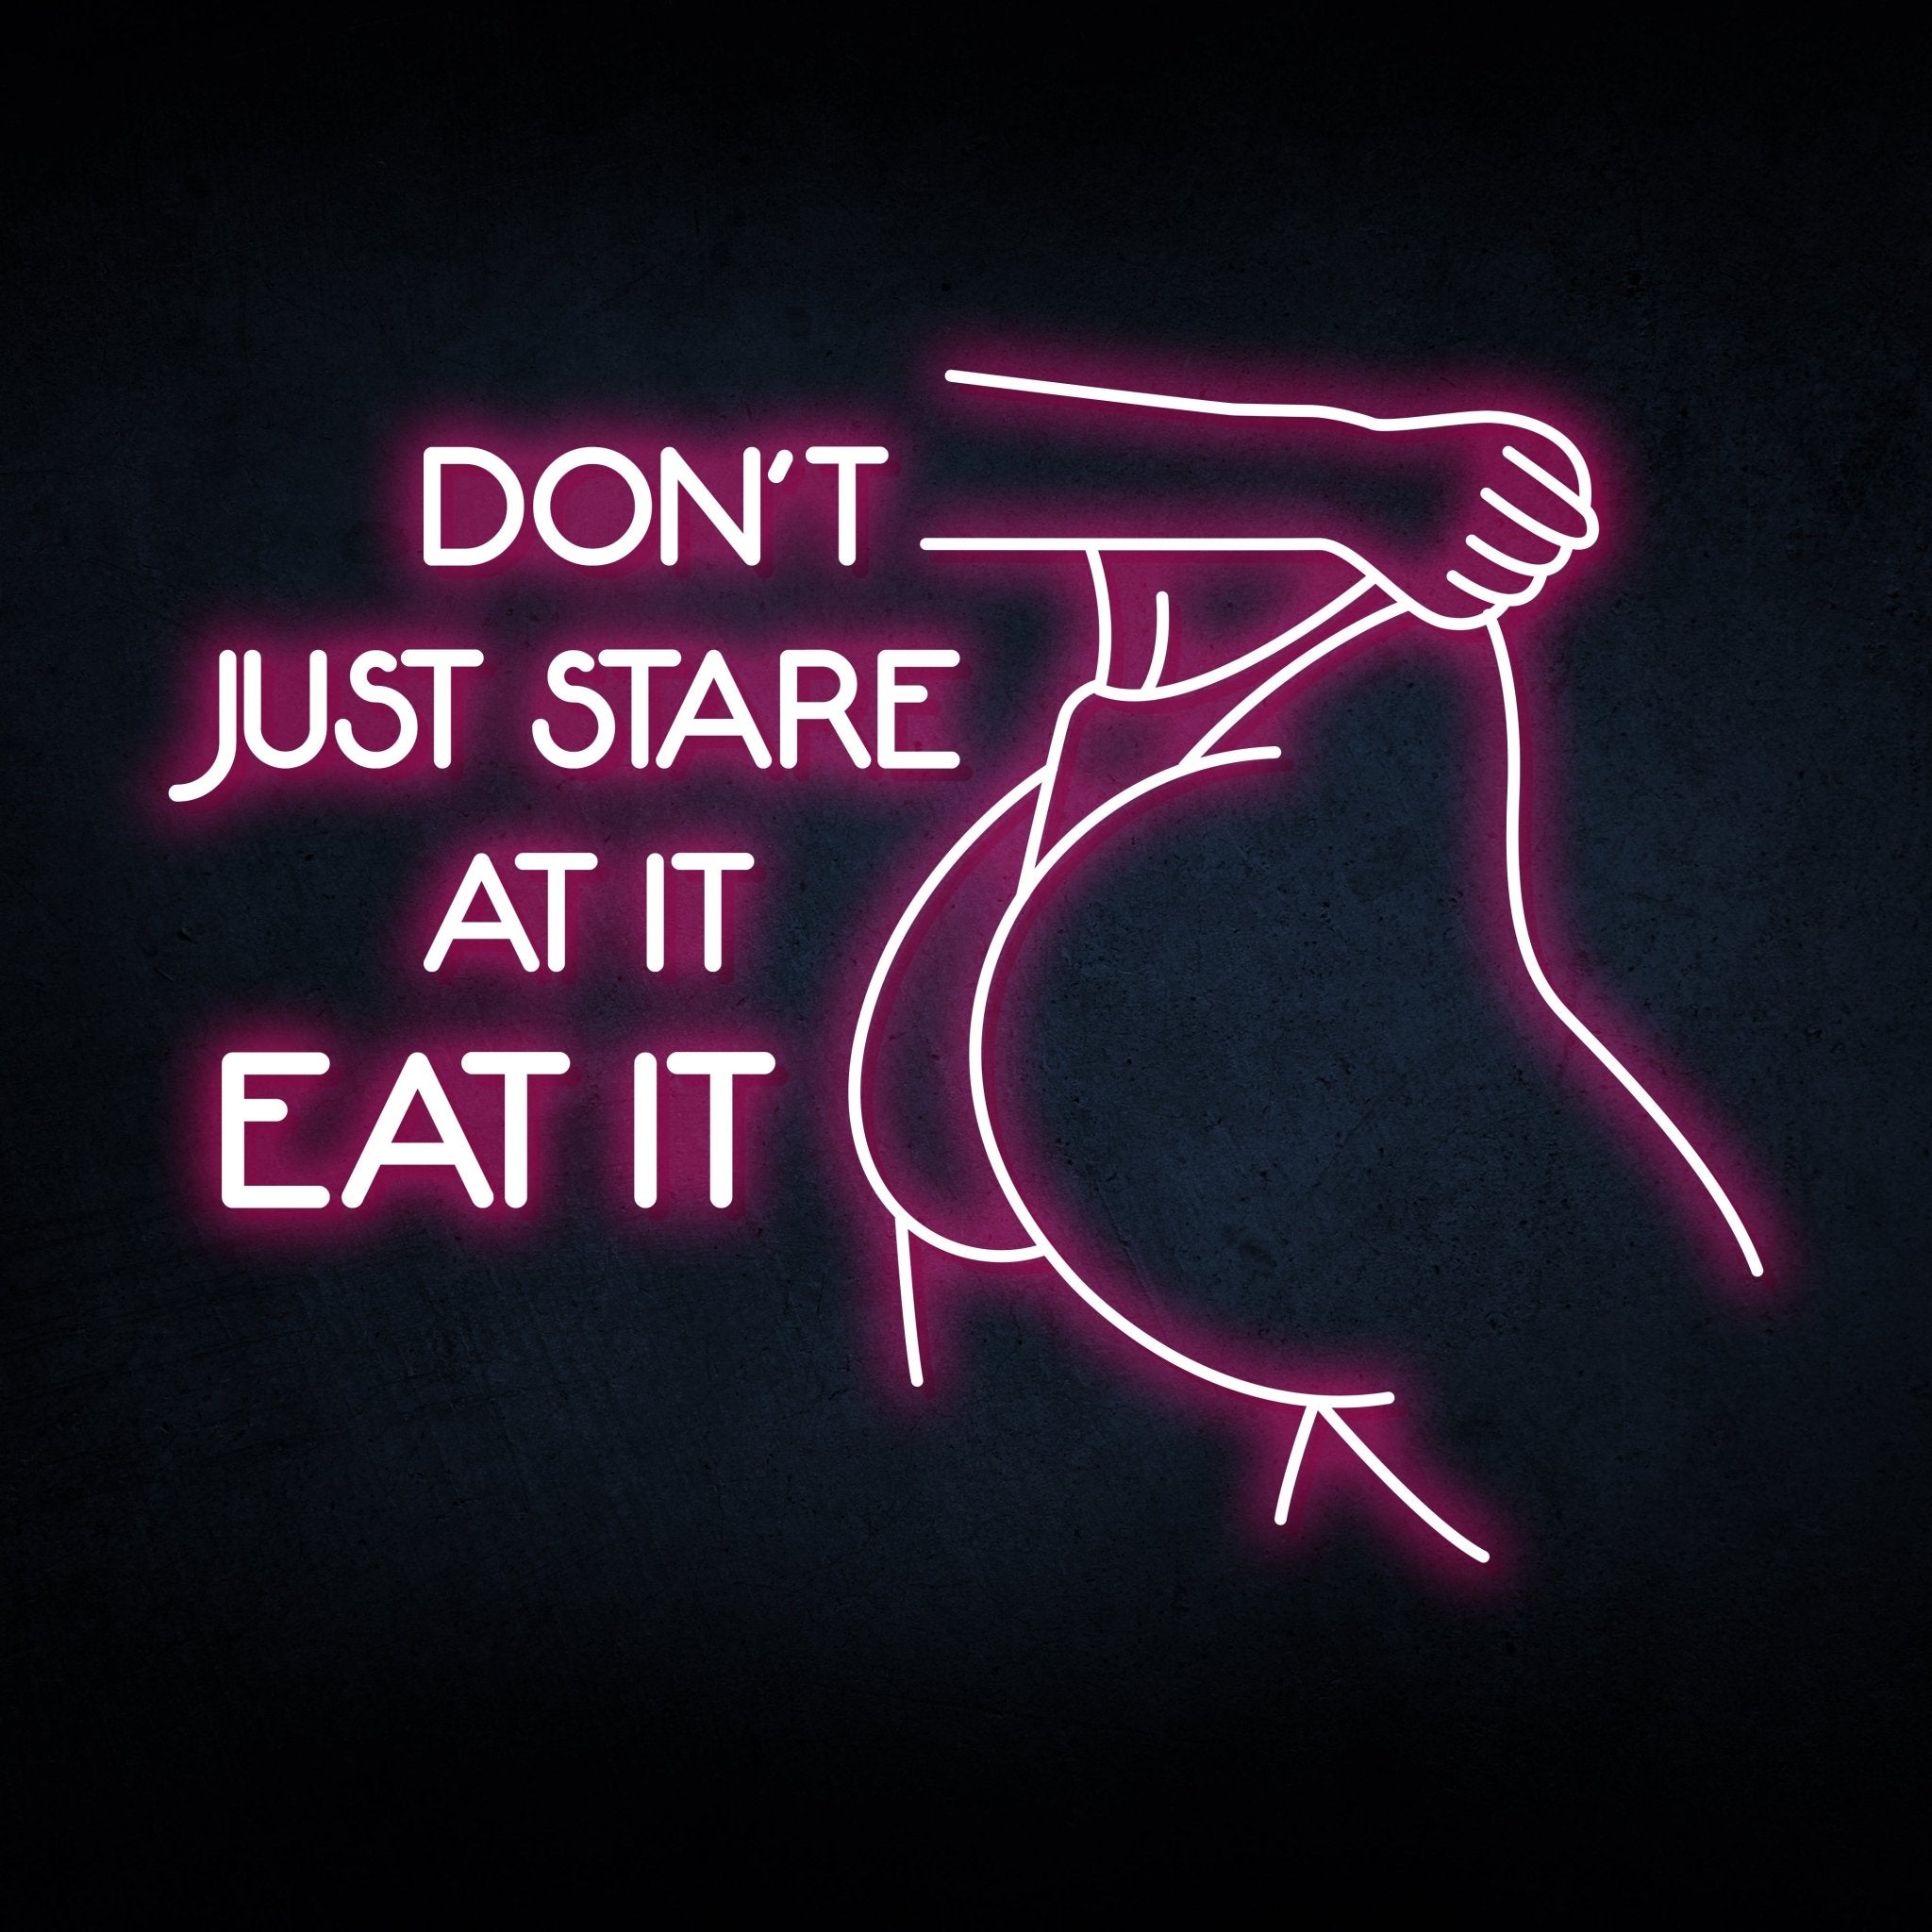 DON'T JUST STARE AT IT NEON SIGN - REBHORN DESIGN